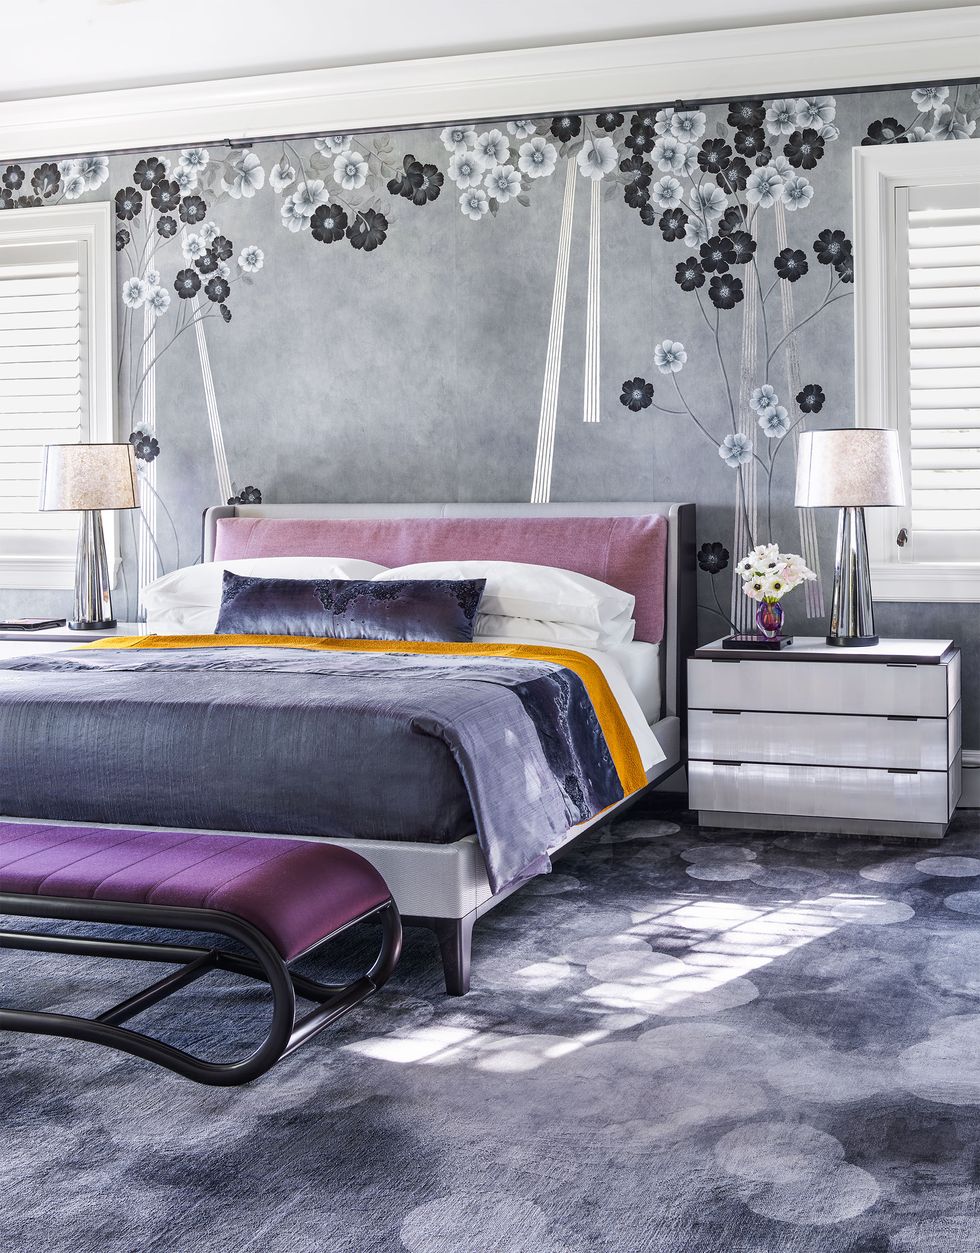 The carpeted master bedroom has floral wallpaper, a bed with a lilac comforter, two nightstands with lamps, and a metal bench with a plum chair.